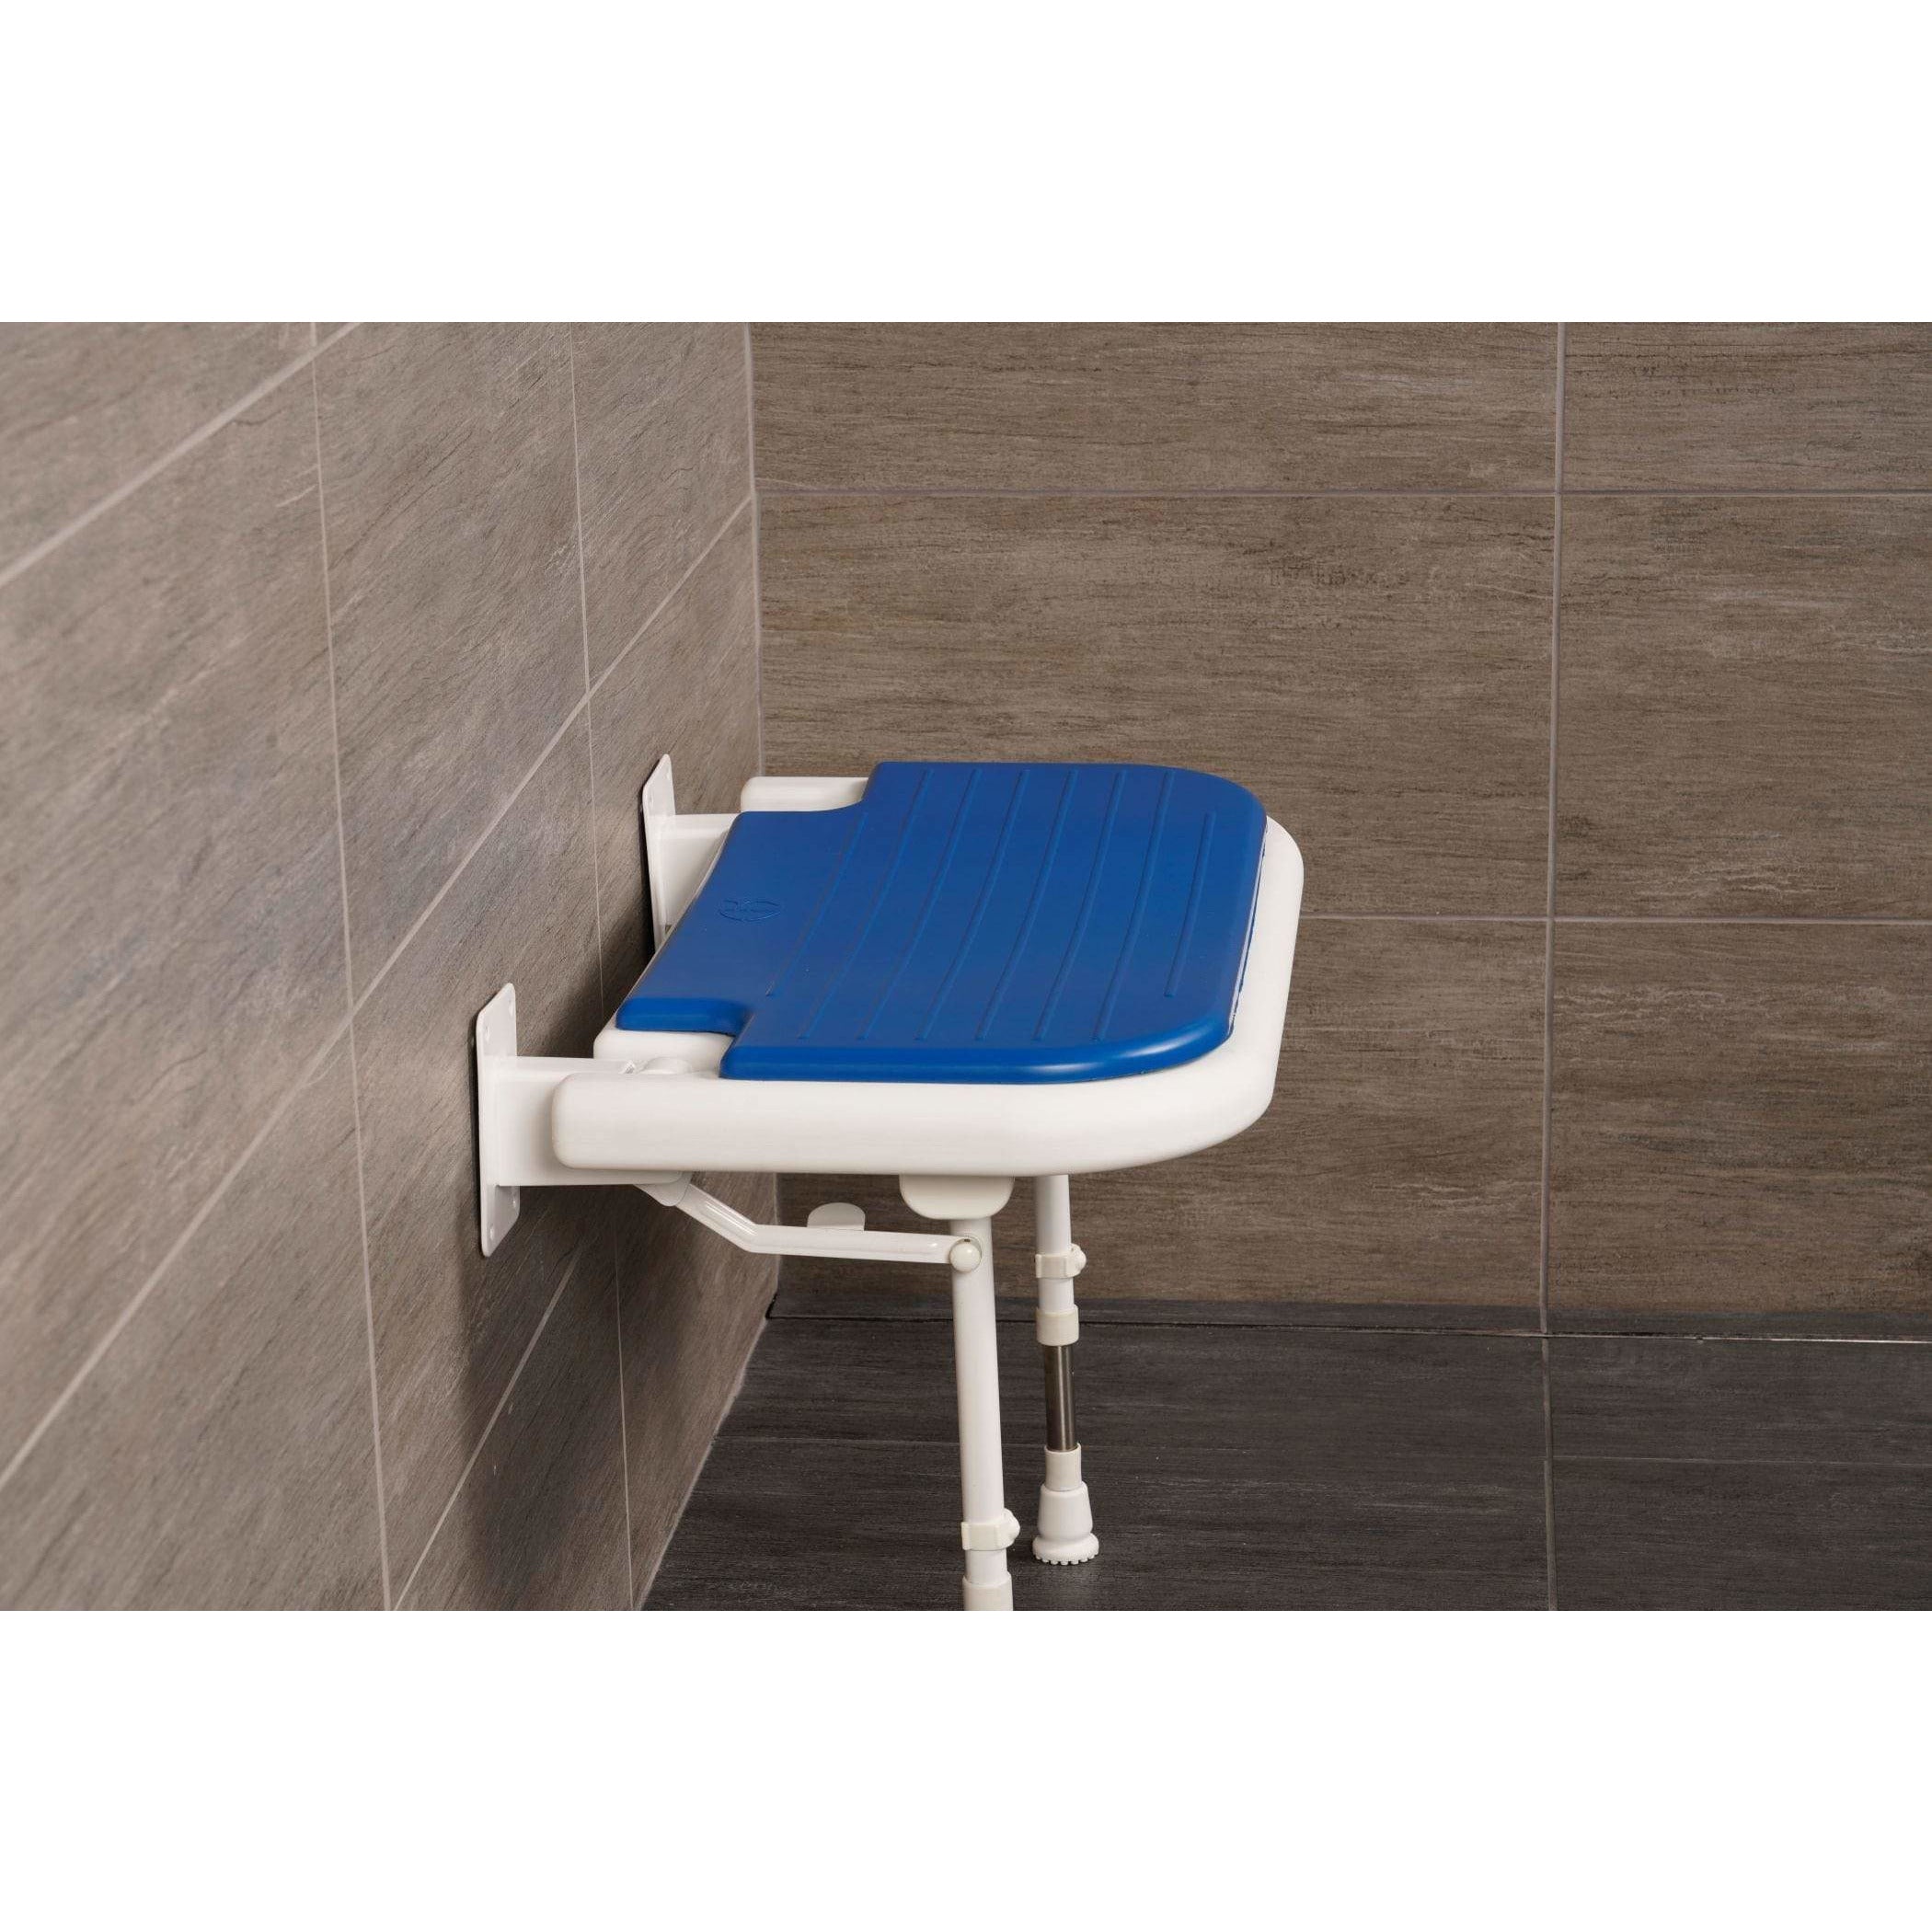 Arc First 4000 Series 26" Wide Folding Shower Seat with Blue Pad 04580P